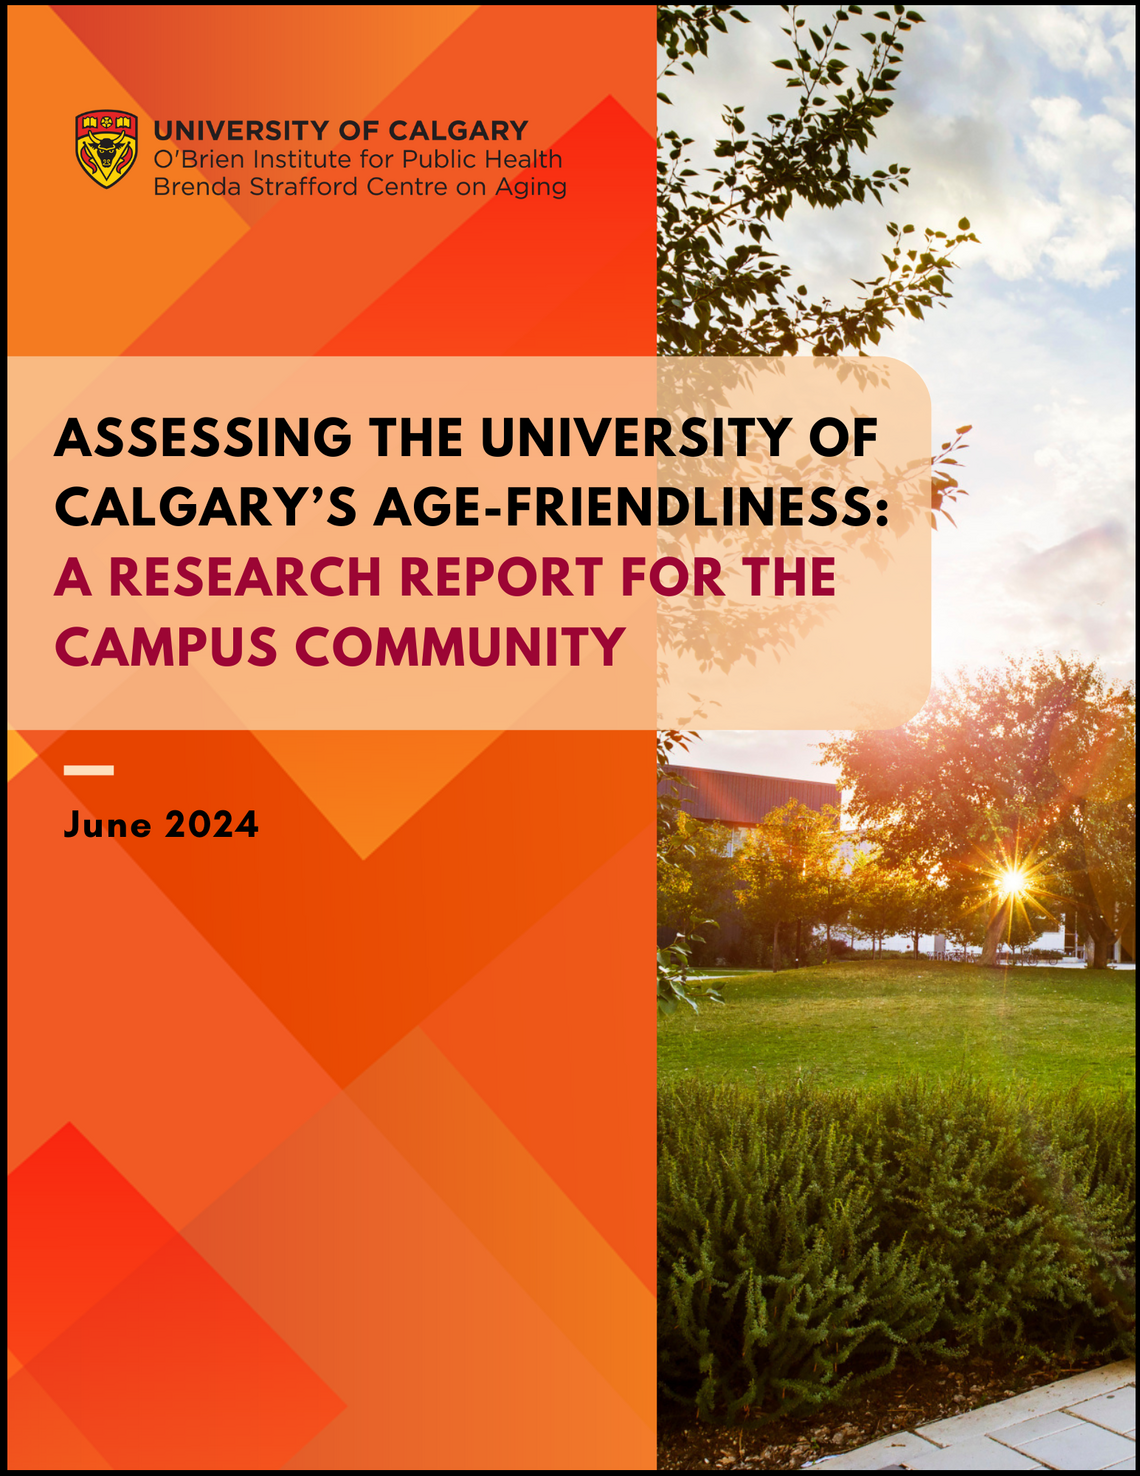 Image of the cover page of the research report